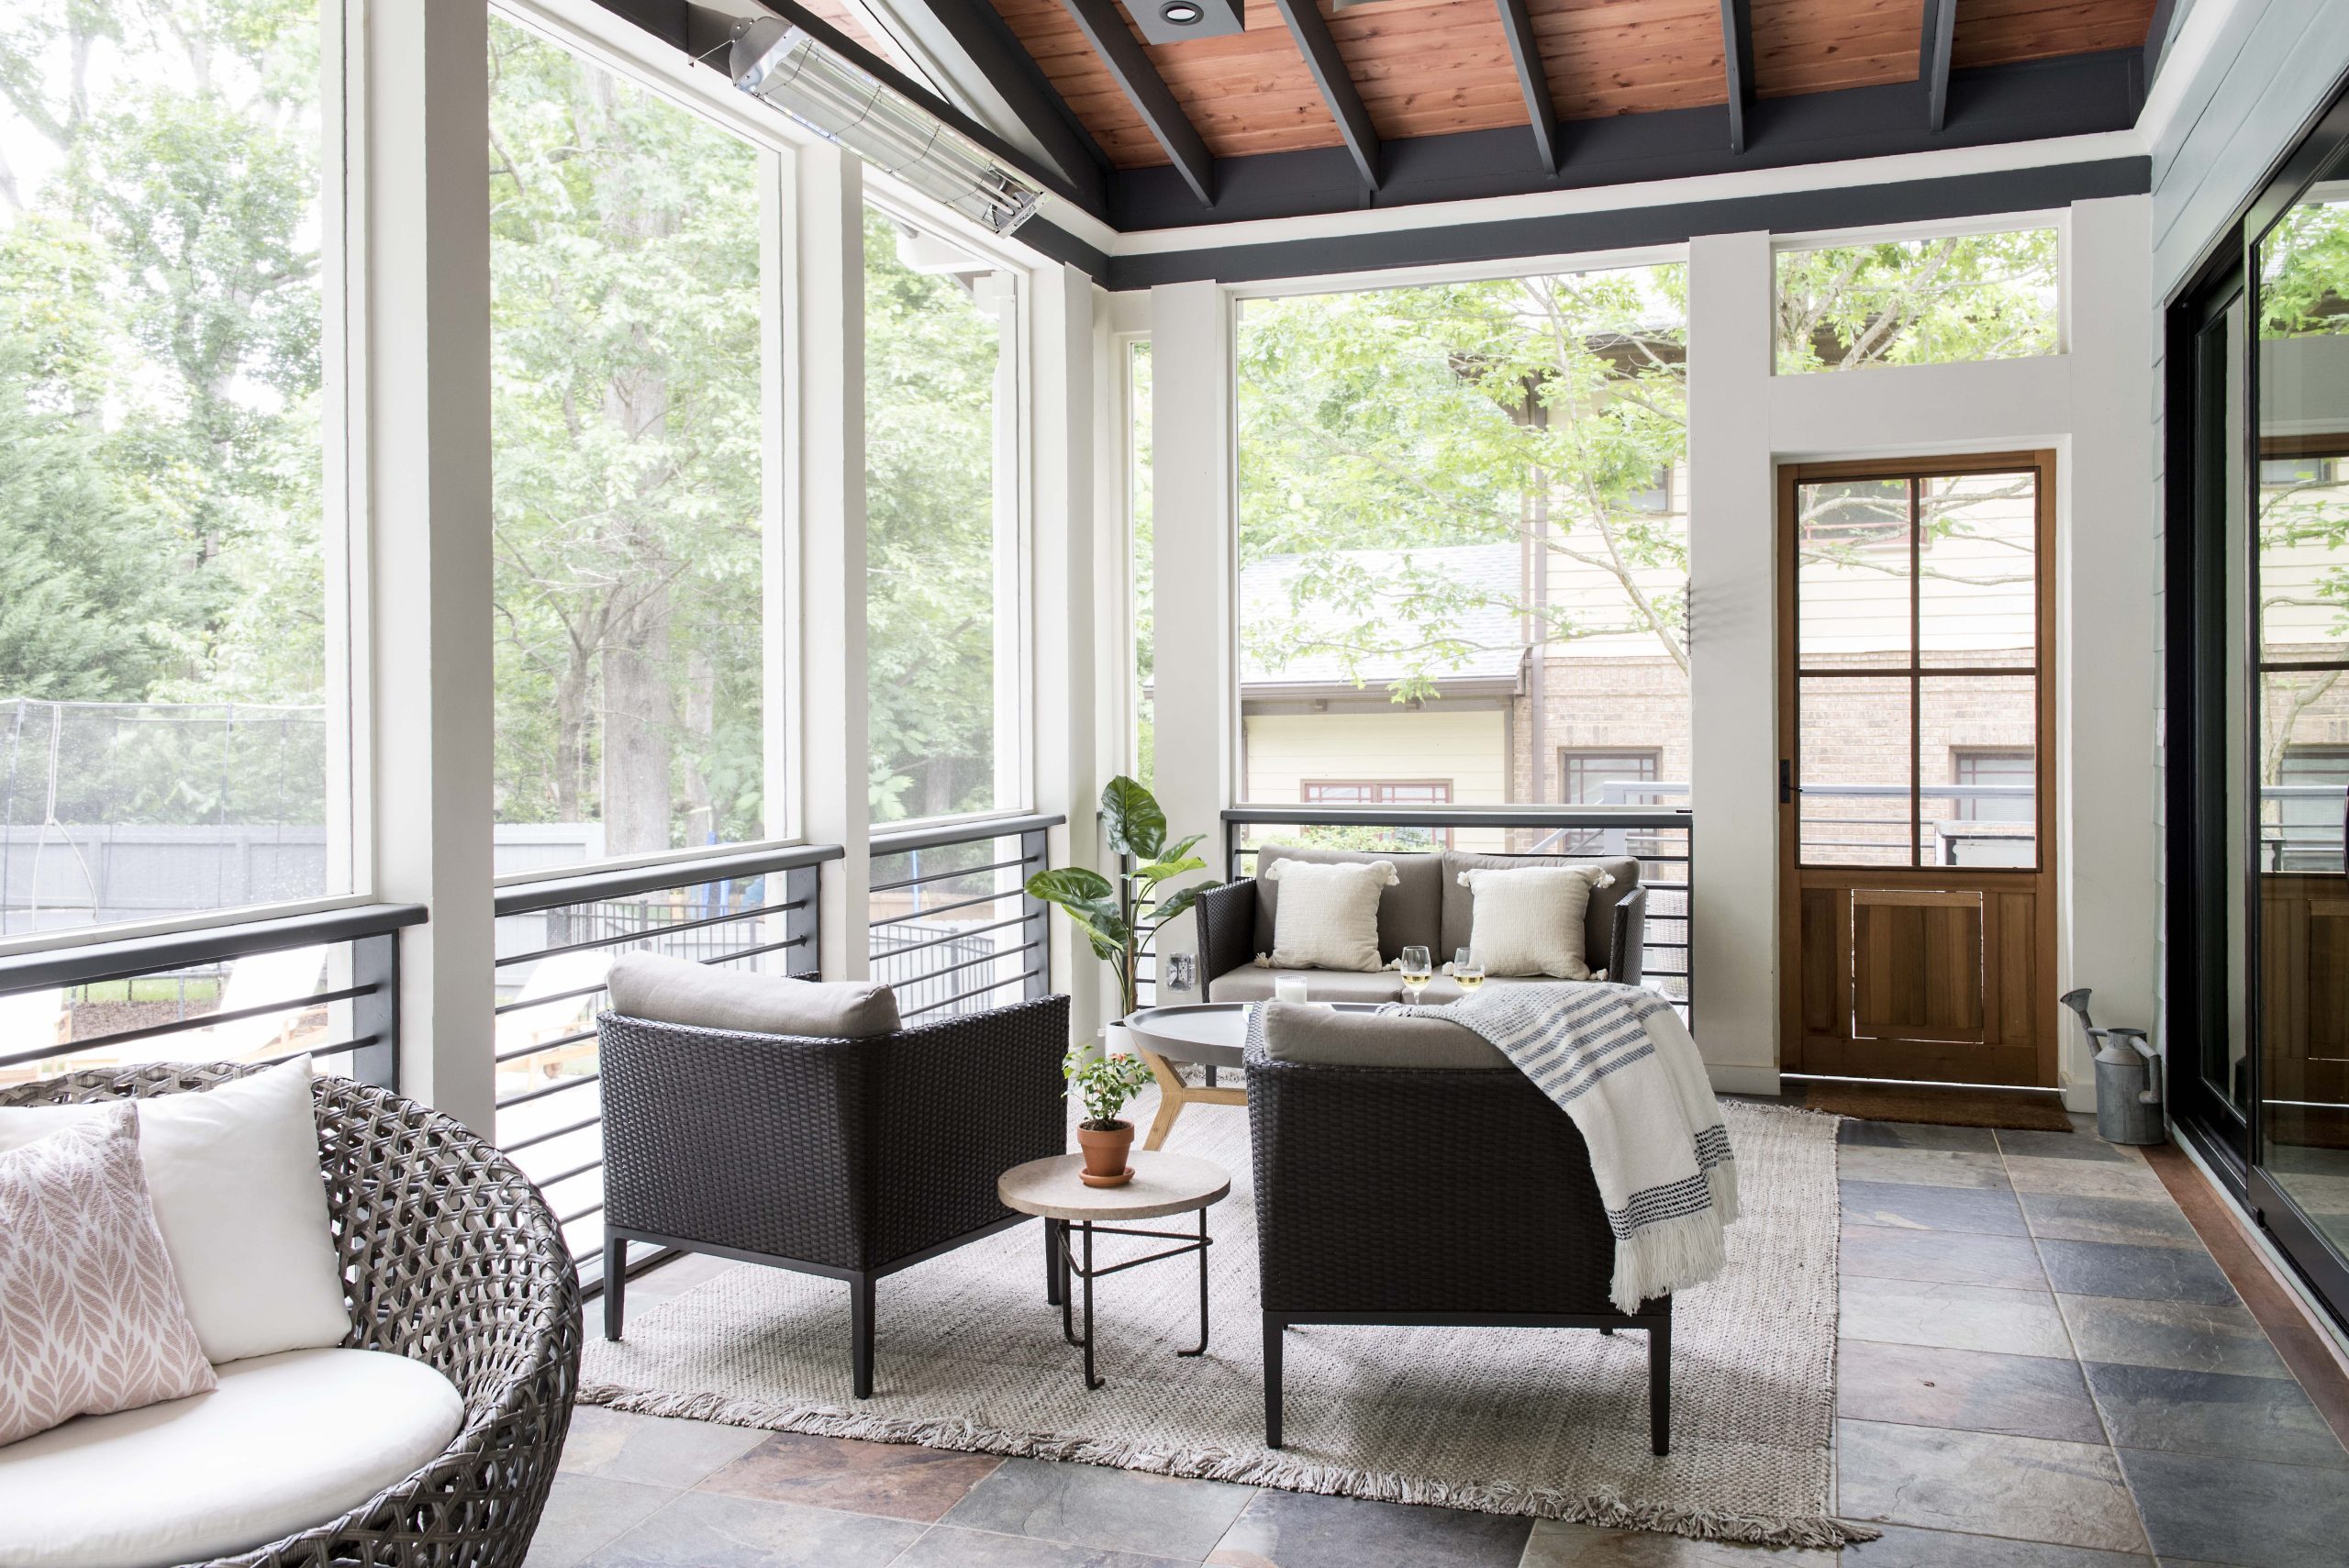 Transitional screened porch with natural stained ceiling, white beams, and granite tile floor.